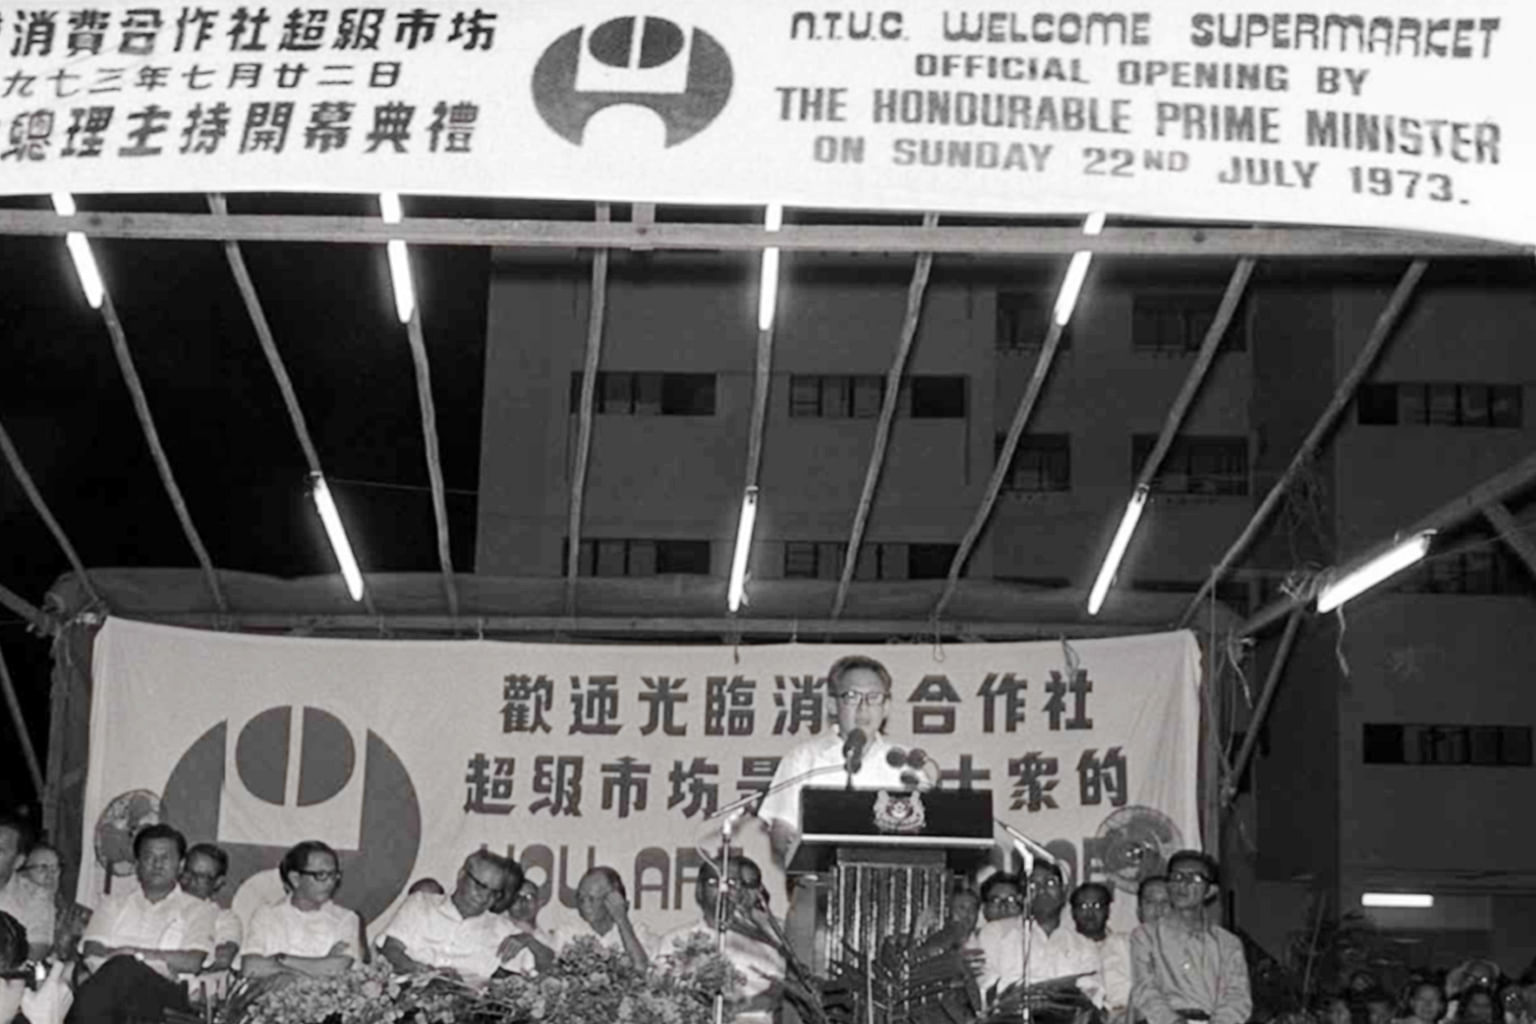 Mr Lee Kuan Yew at Official Opening of NTUC Welcome in 1973